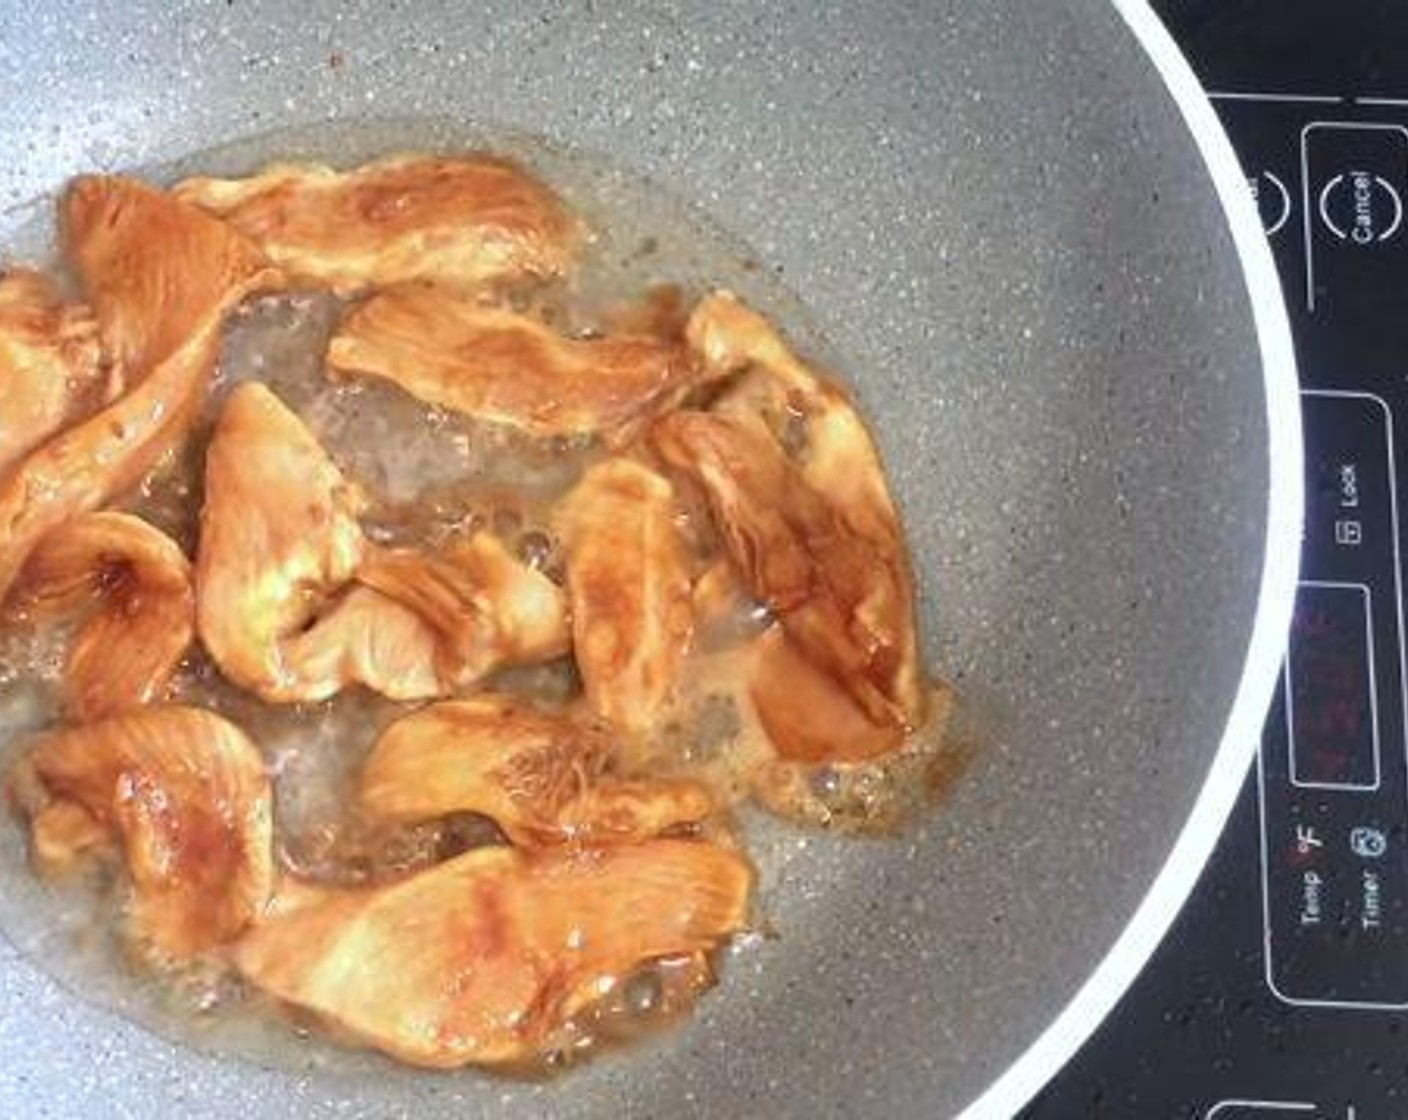 step 2 Add some Vegetable Oil (1/4 cup) to a cooking pan, and stir fry the chicken pieces for about 4-5 minutes.